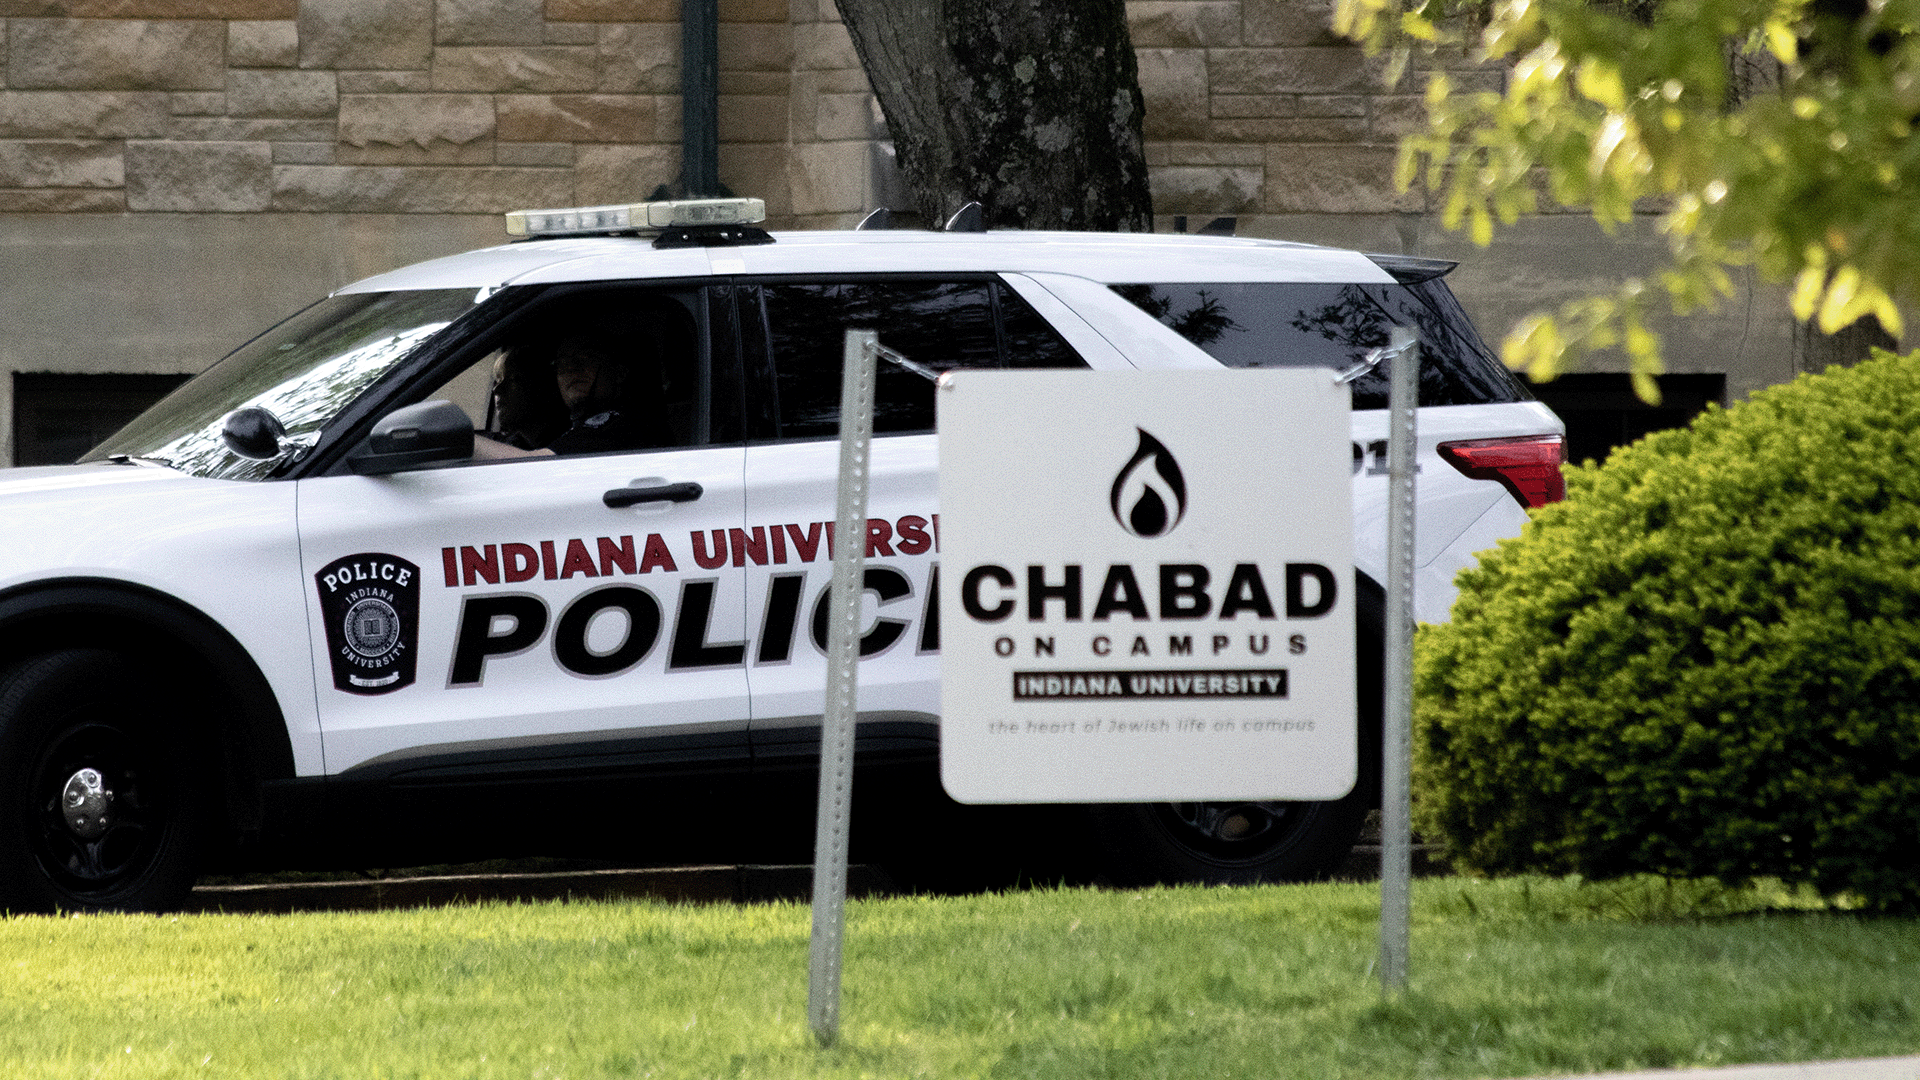 Chabad at Indiana University addresses ongoing Gaza protests on campus